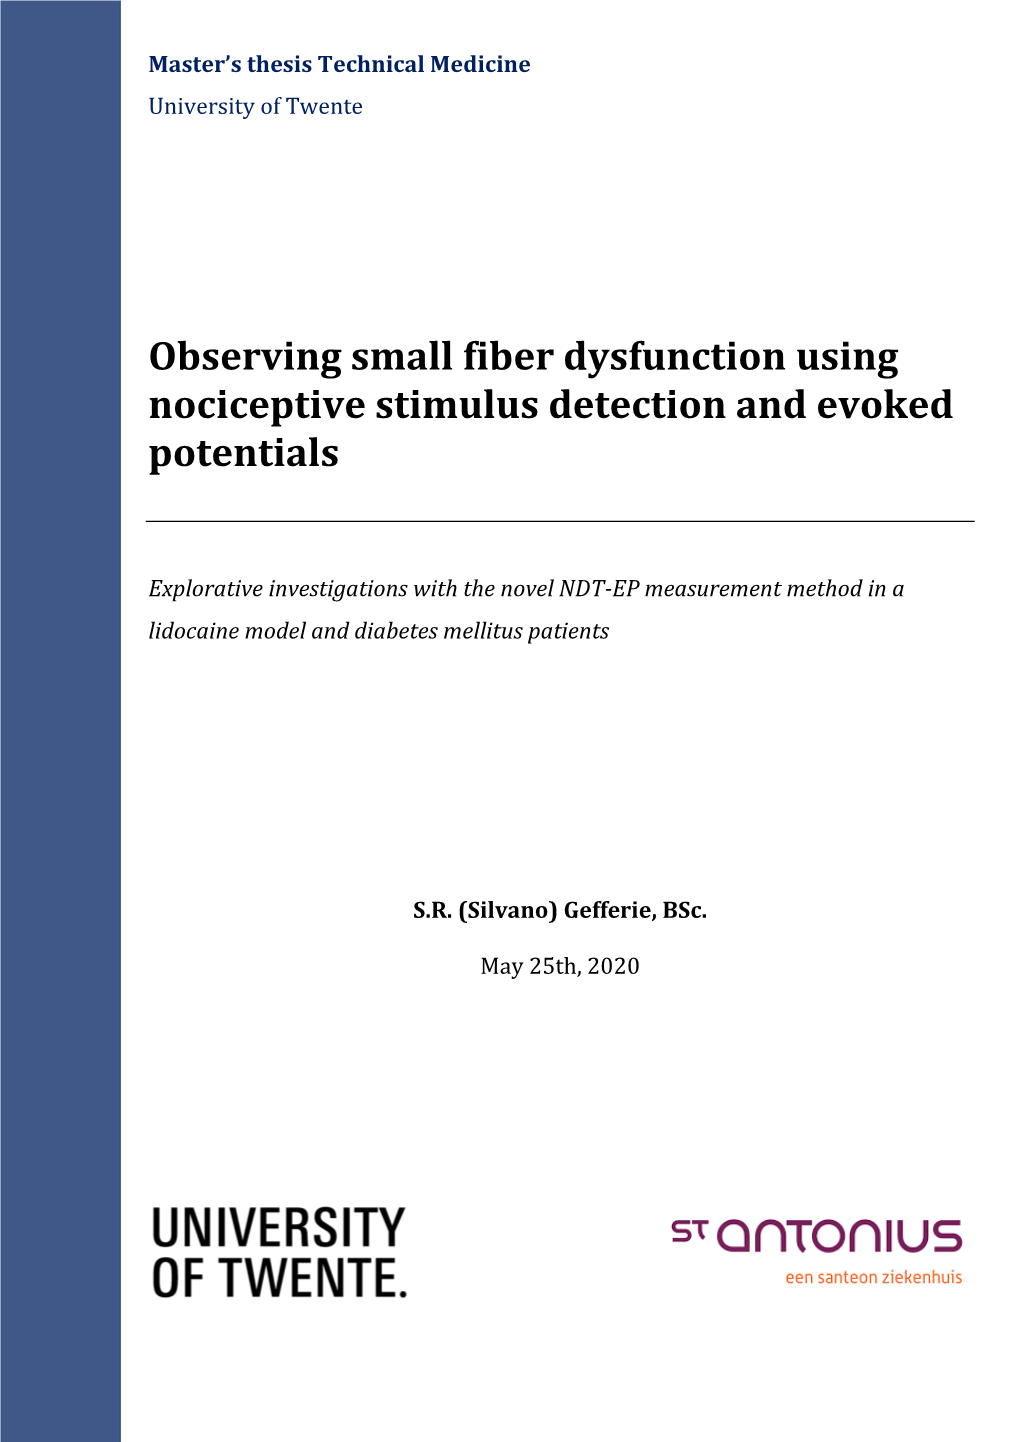 Observing Small Fiber Dysfunction Using Nociceptive Stimulus Detection and Evoked Potentials